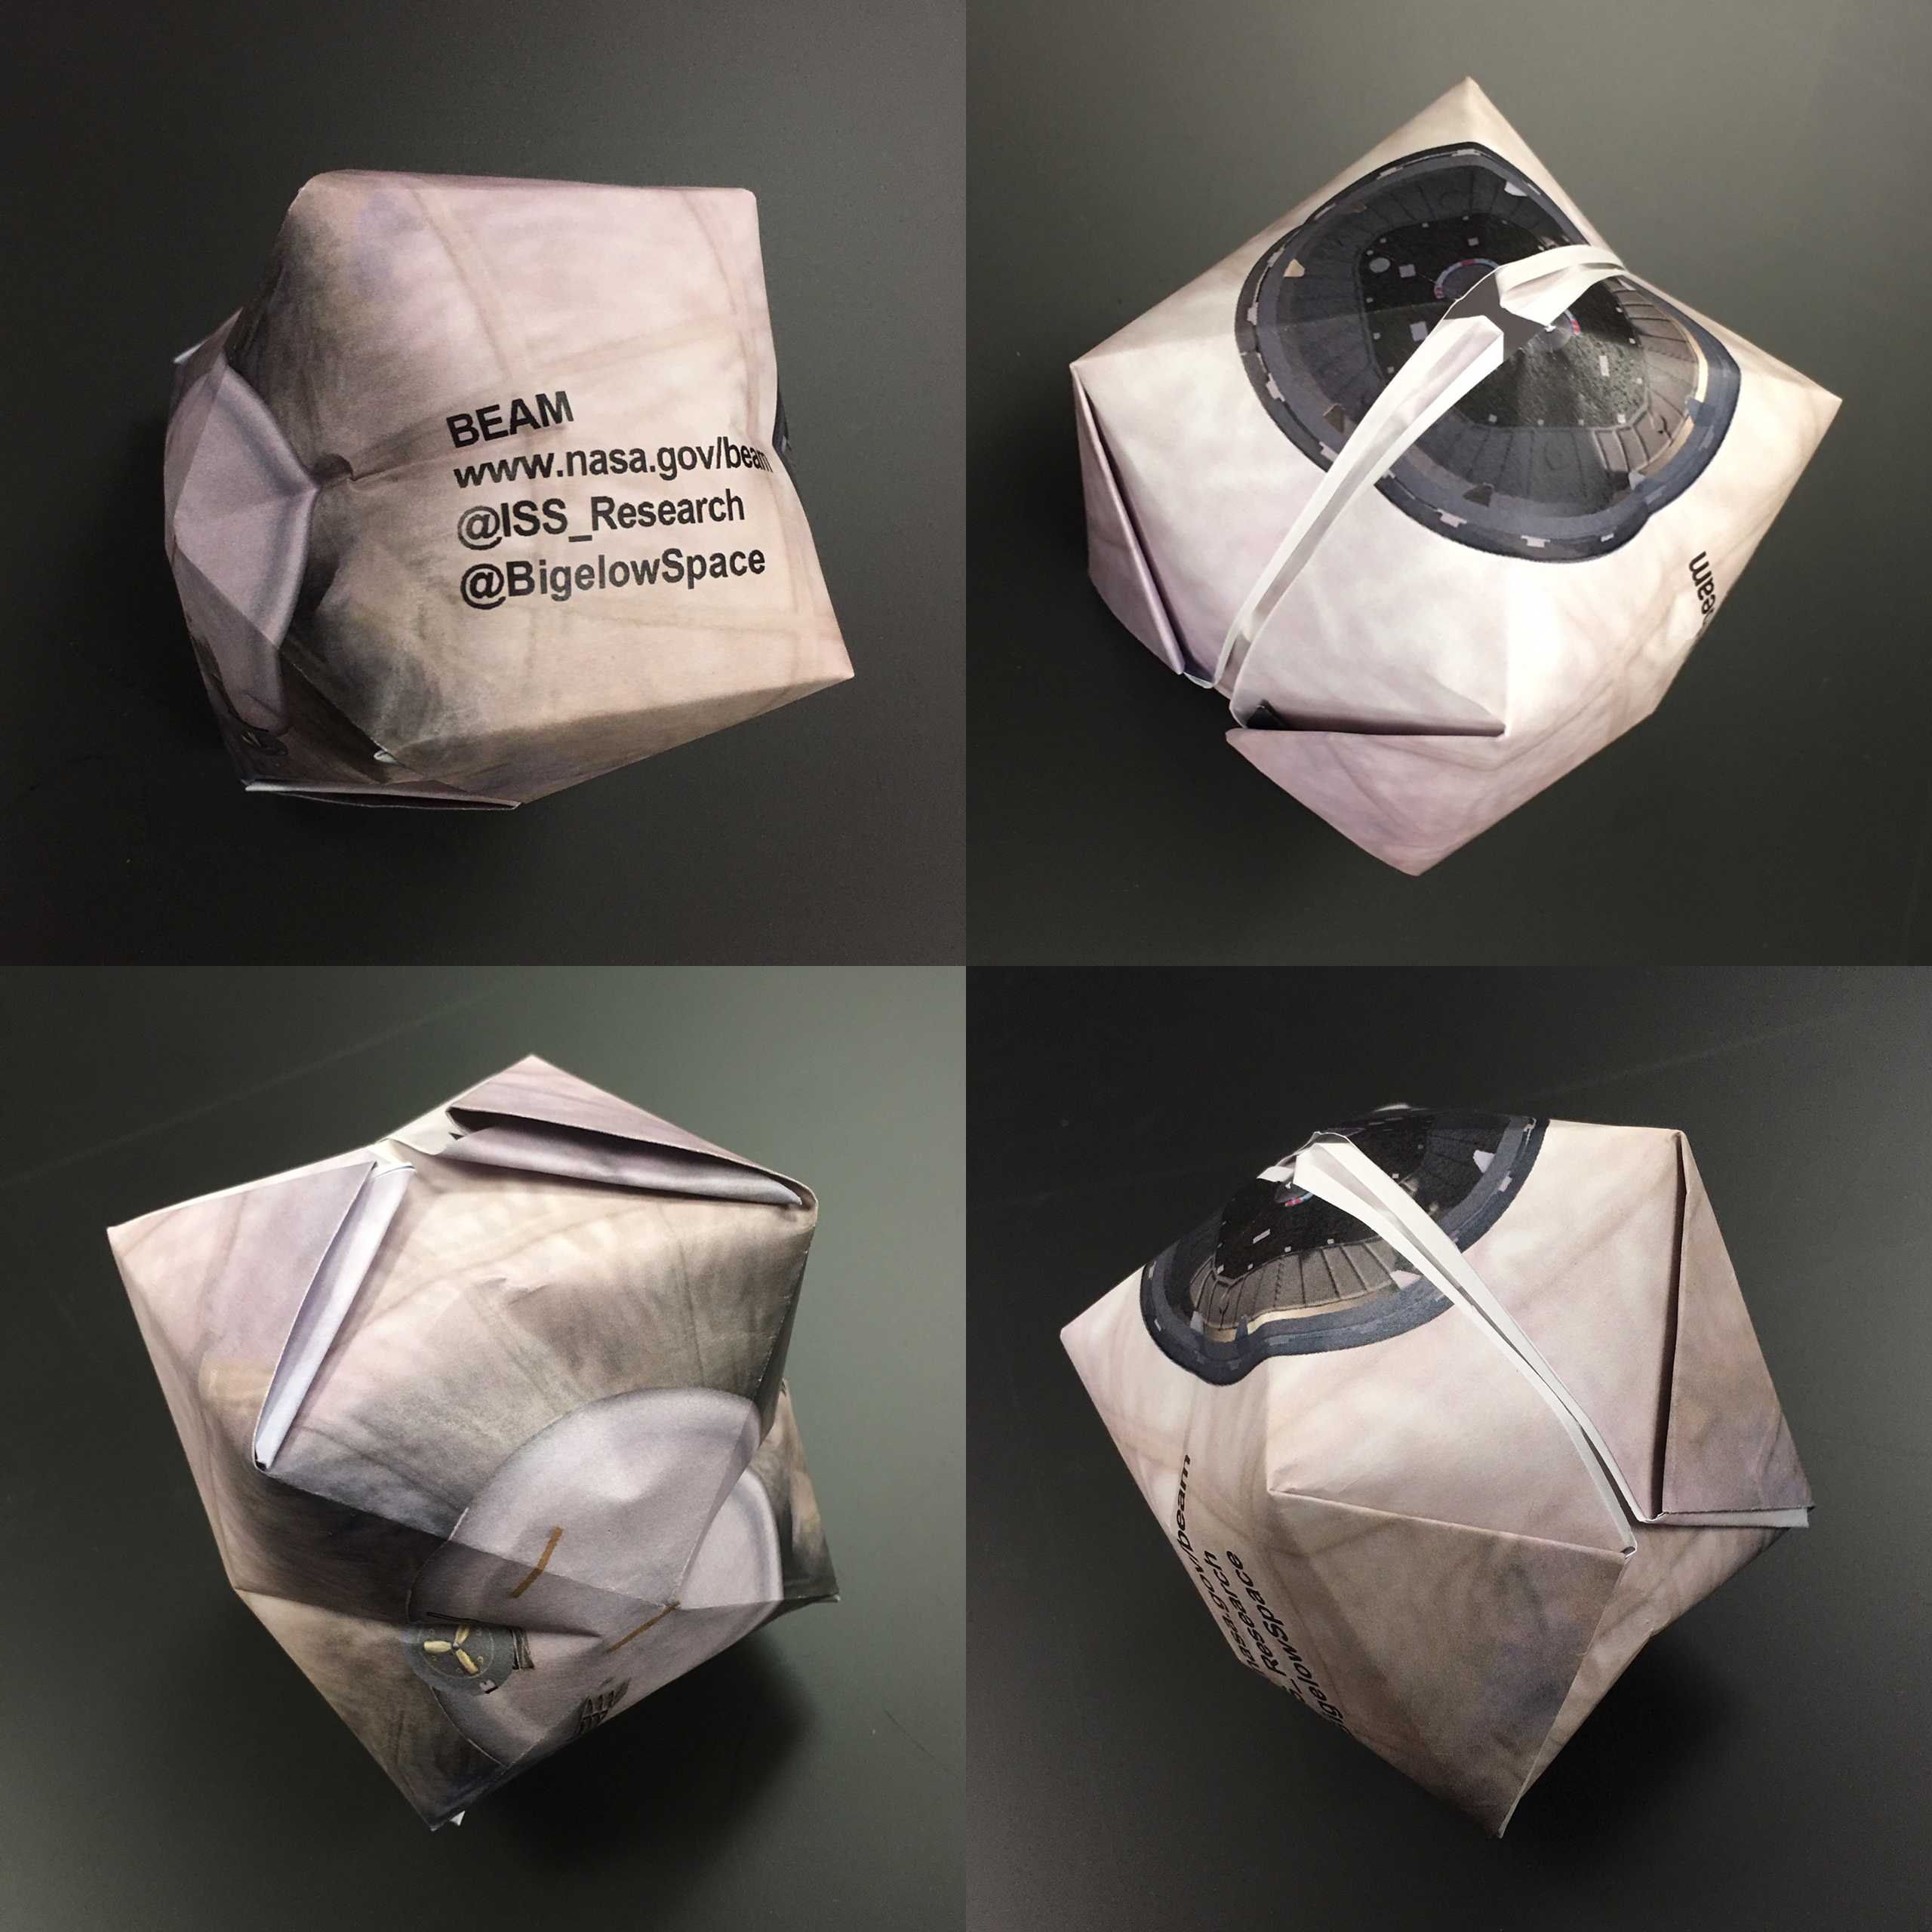 Make Your Own Origami Space Habitat